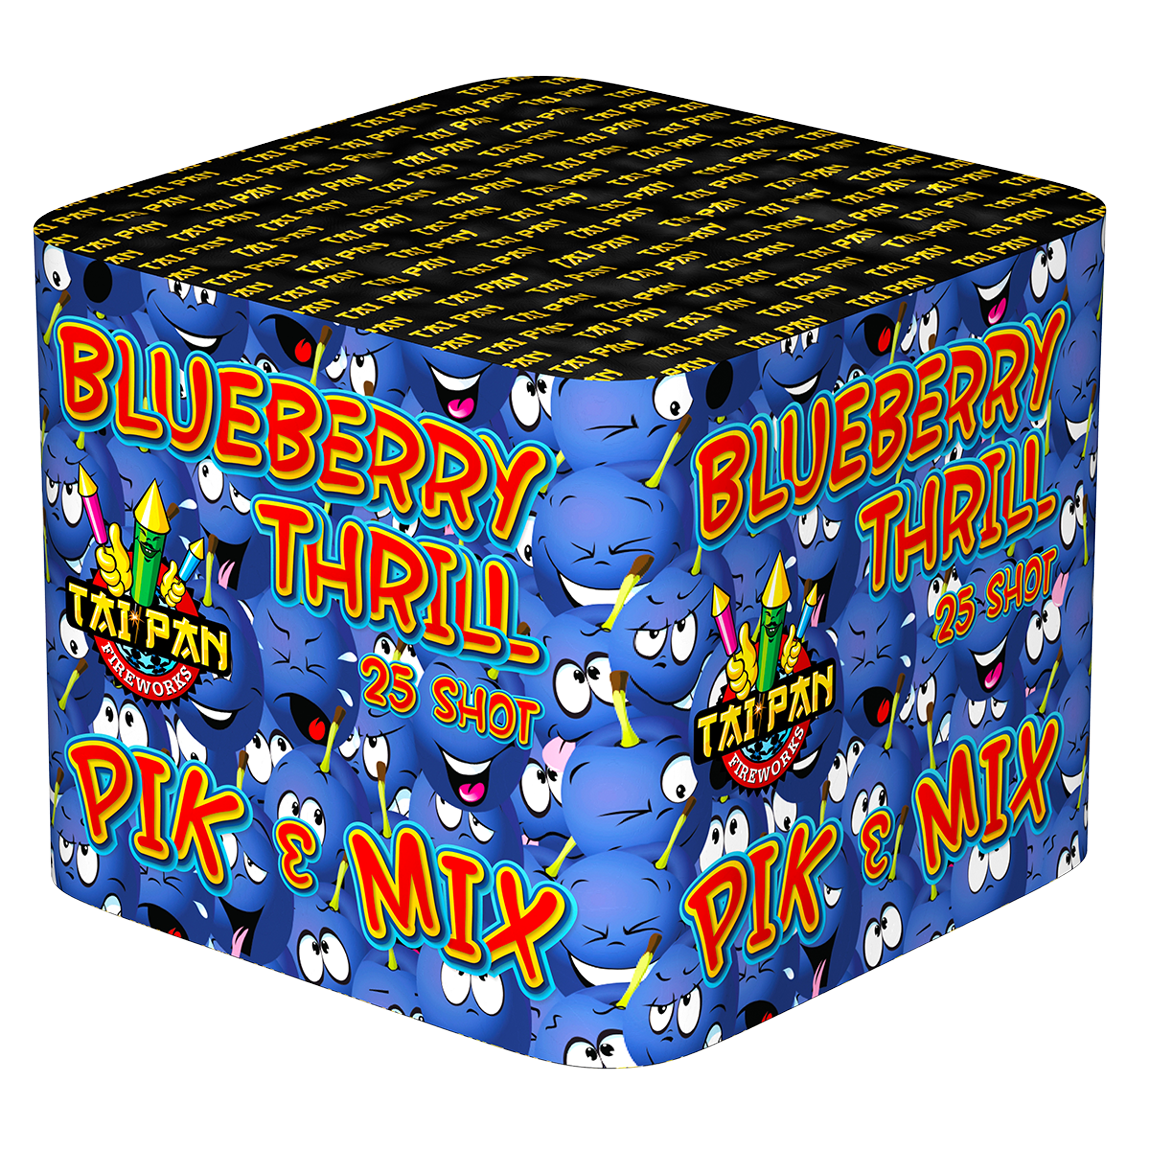 Blueberry Thrill by Tai Pan Fireworks